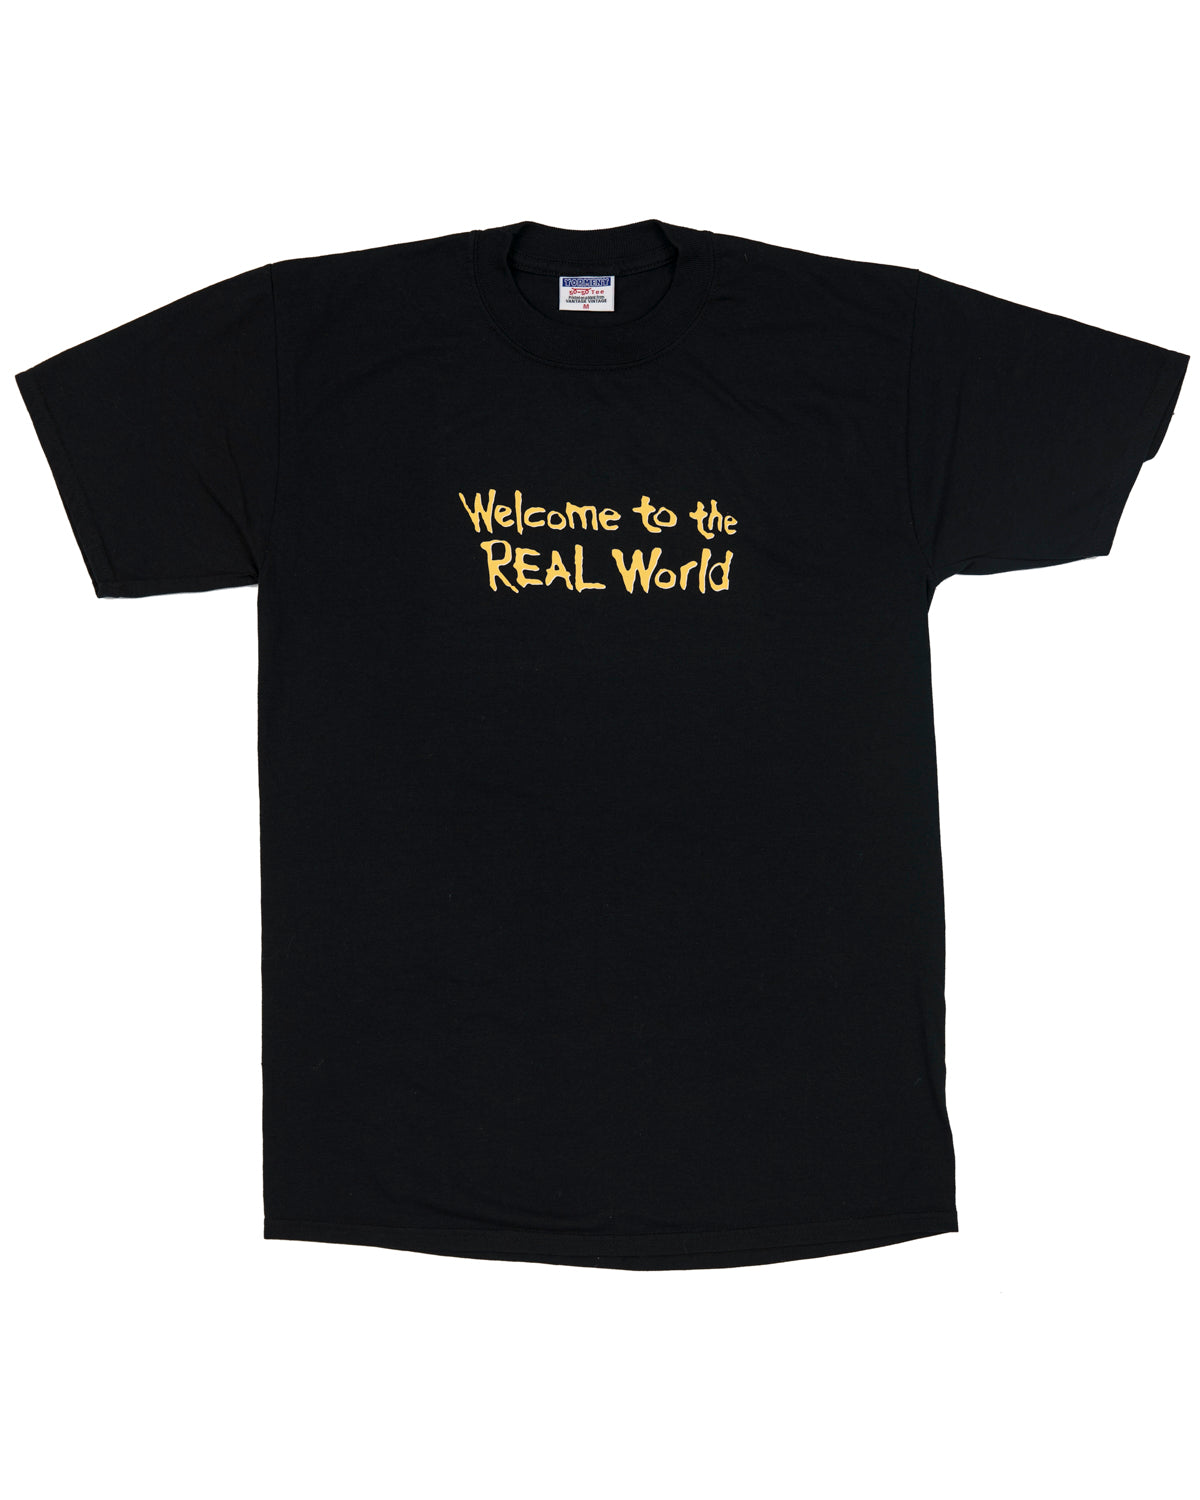 "Welcome to the Real World" Shirt (Vantage x Torment Collaboration)